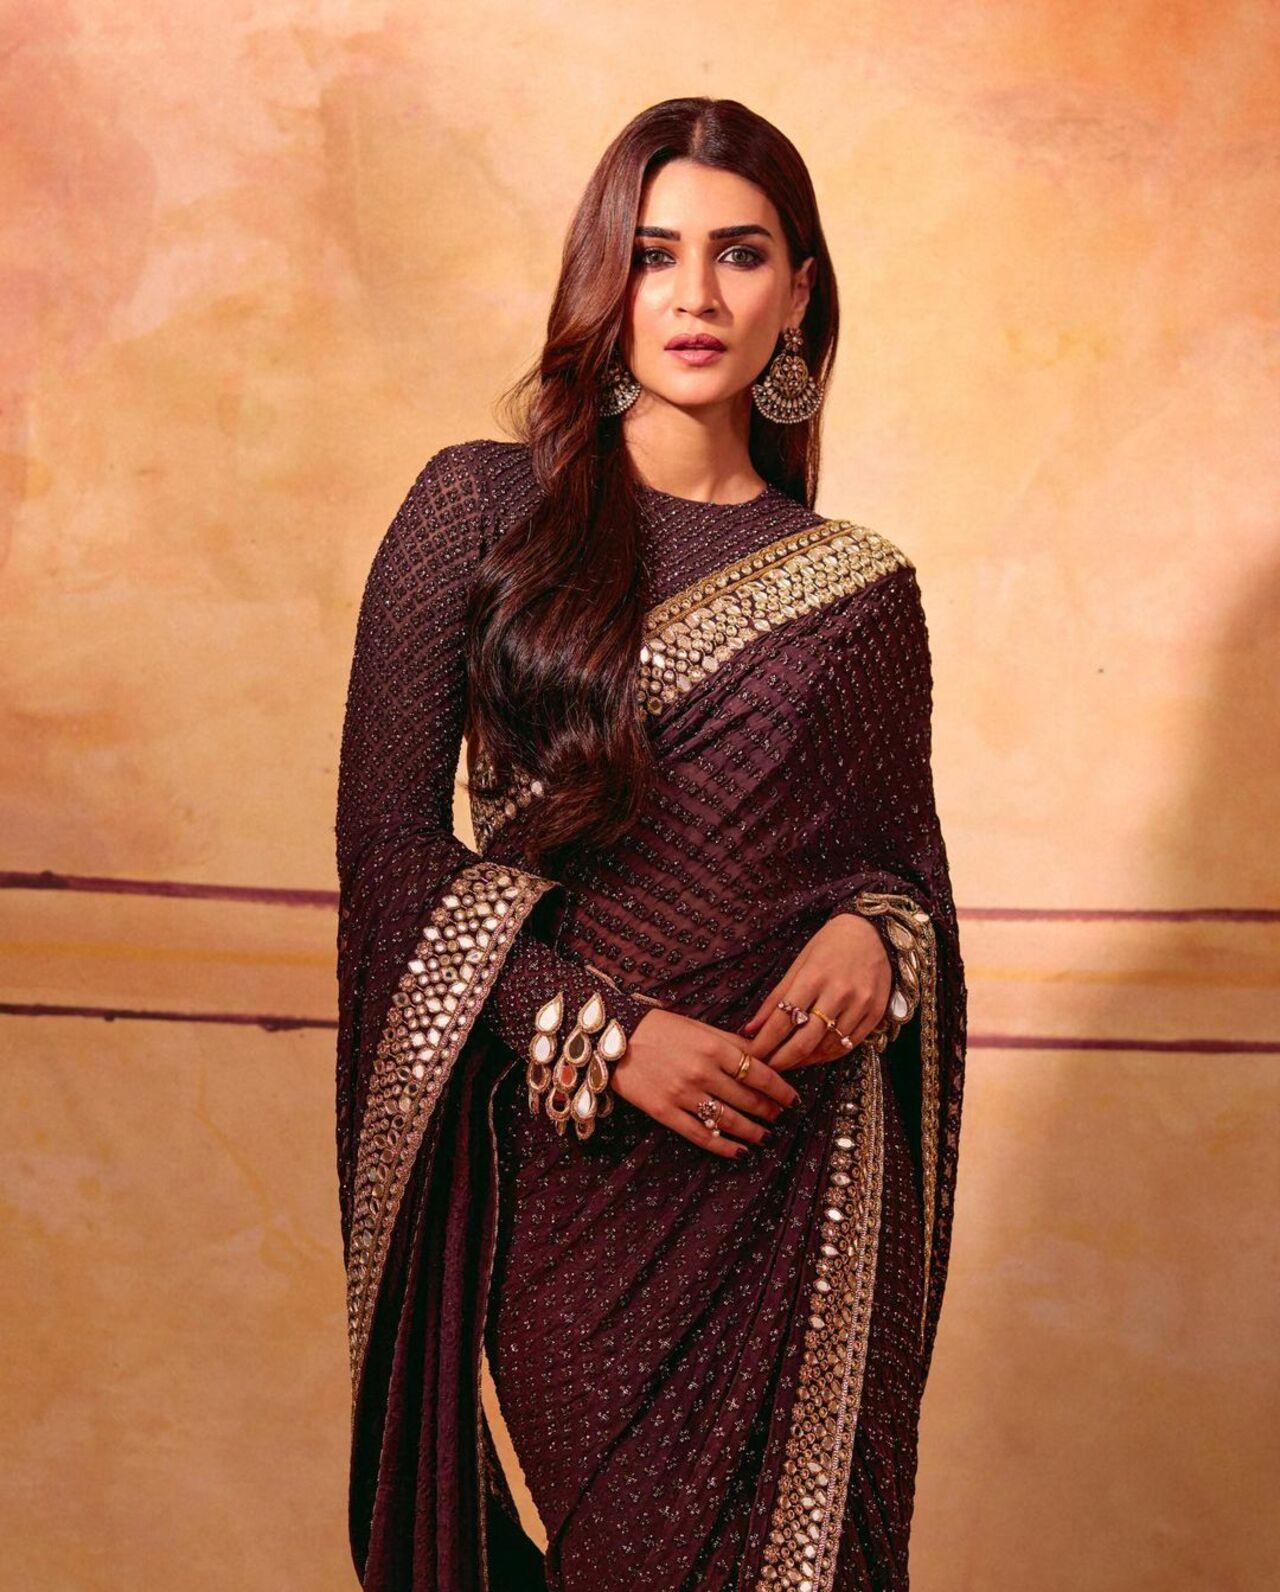 Kriti donned a stunning chocolate-coloured saree during a promotional event for her latest release 'Adipurush'